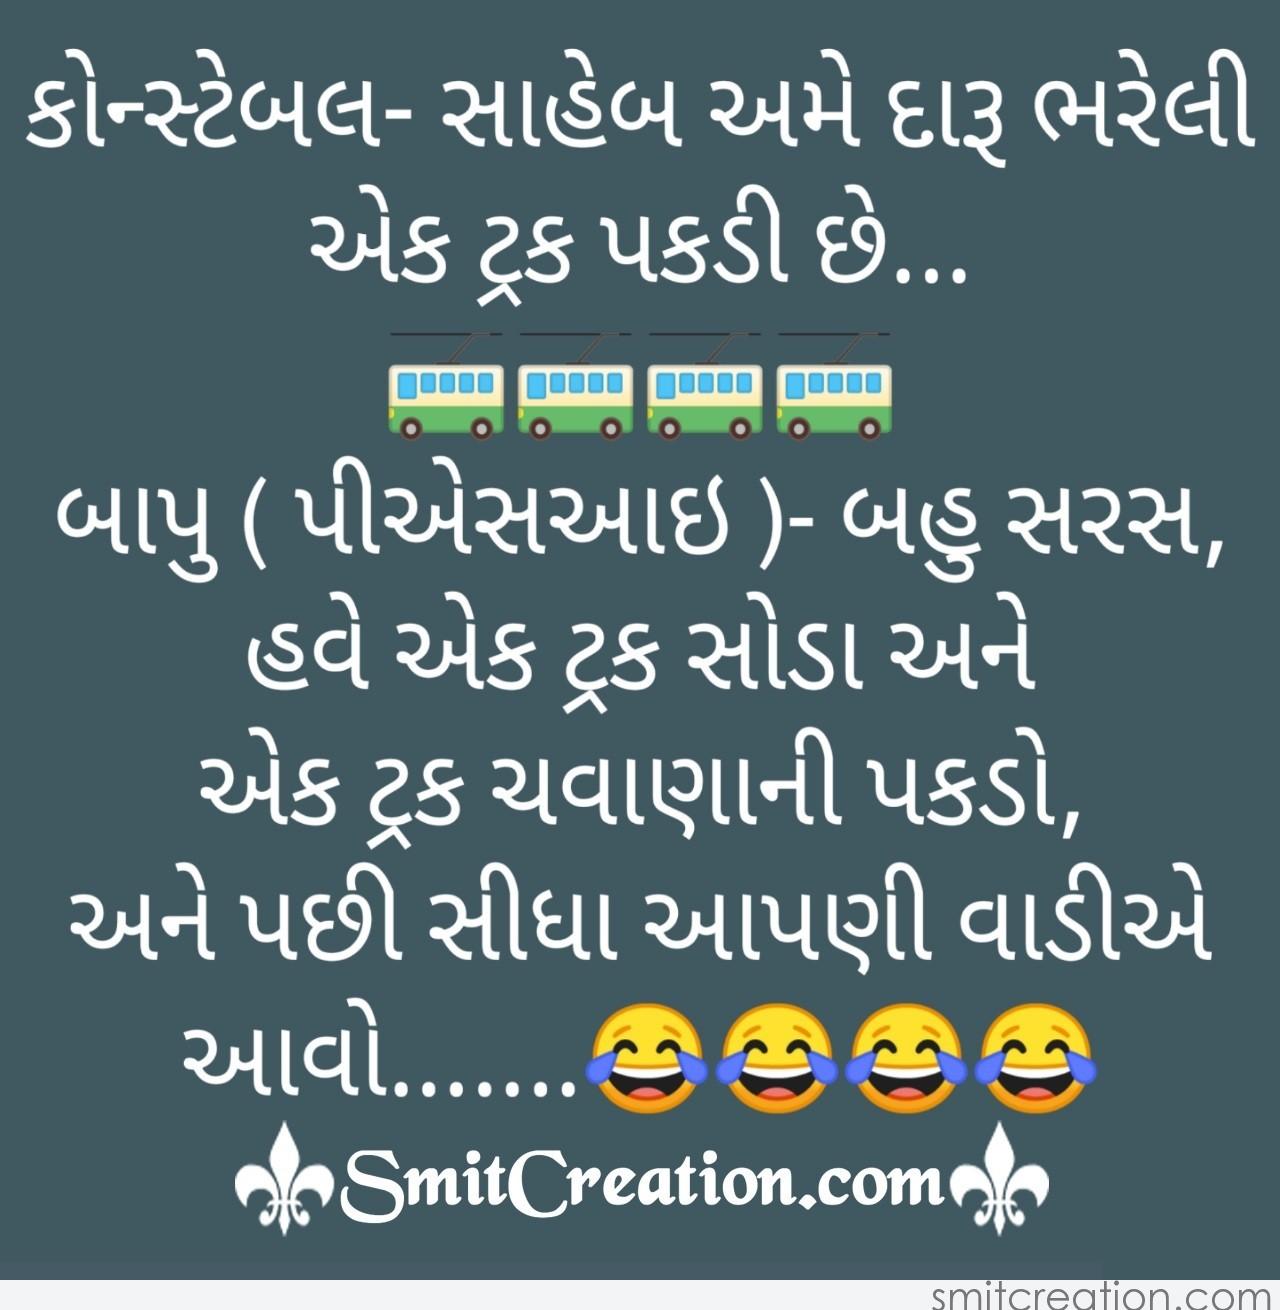 12 Funny Gujarati Jokes - Pictures and Graphics for different festivals